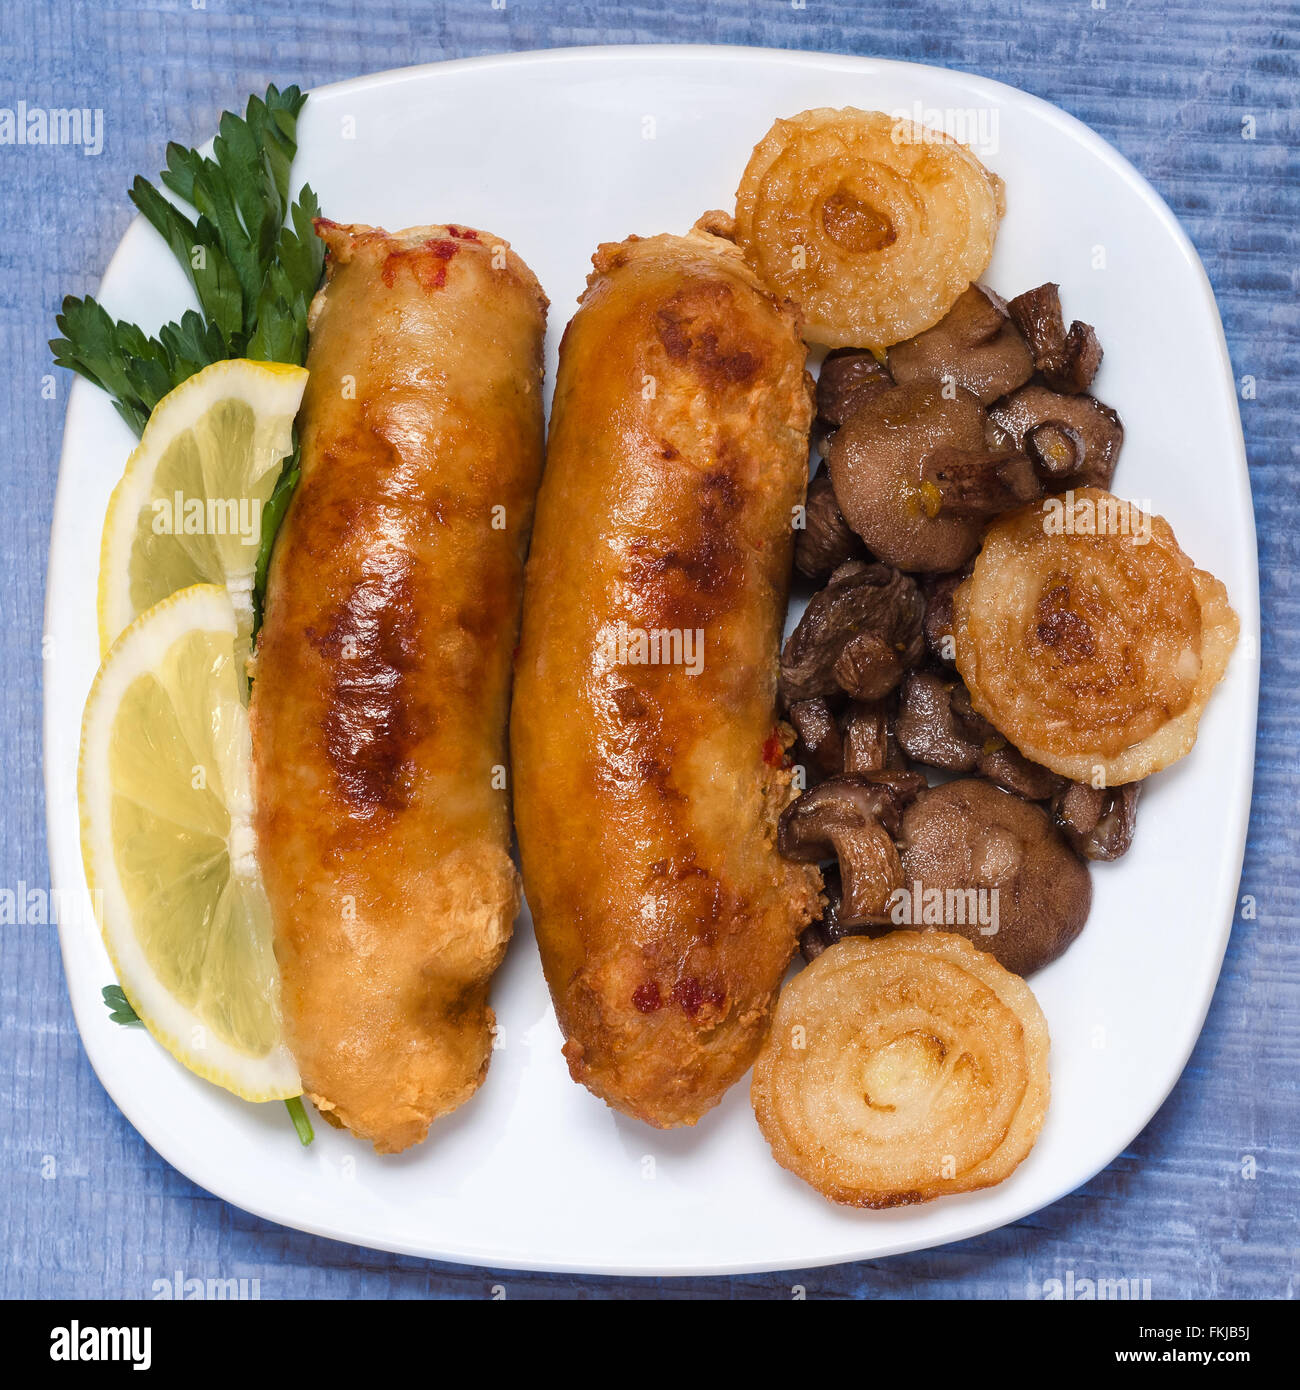 Fried sausage with mushrooms and onions. Stock Photo